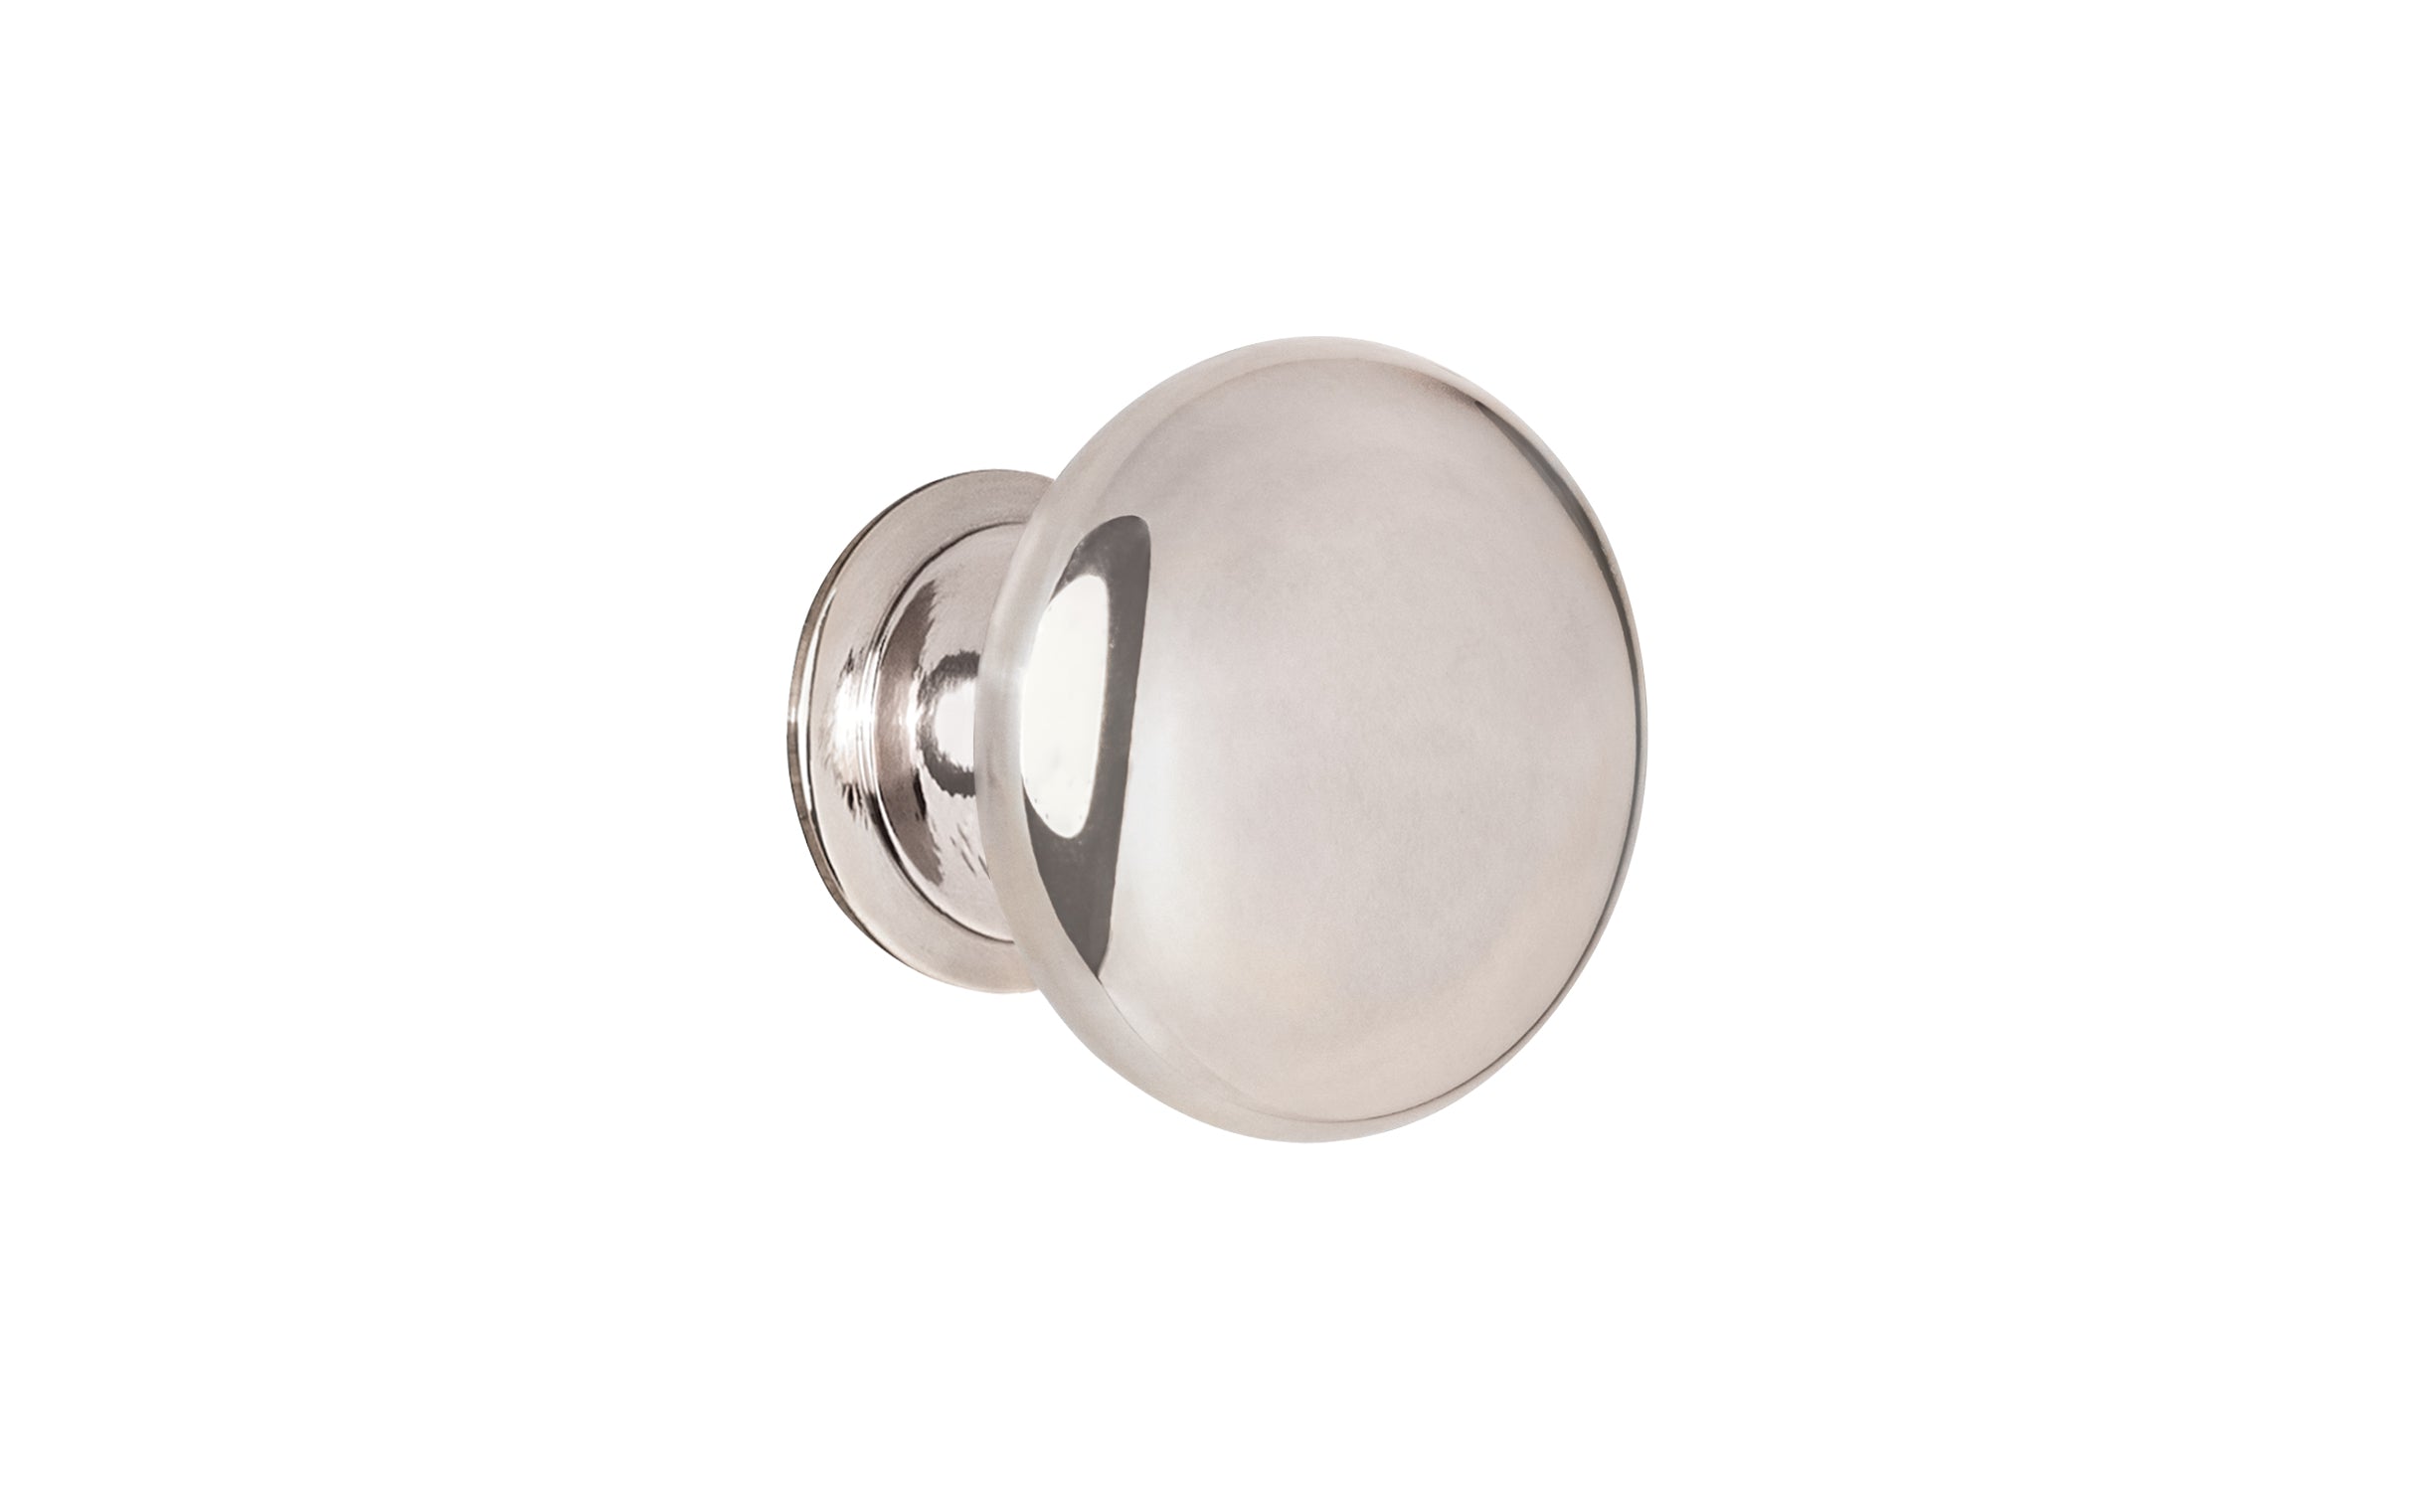 Vintage-style Hardware · Traditional & Classic Brass Knob with a Polished Nickel Finish. 1